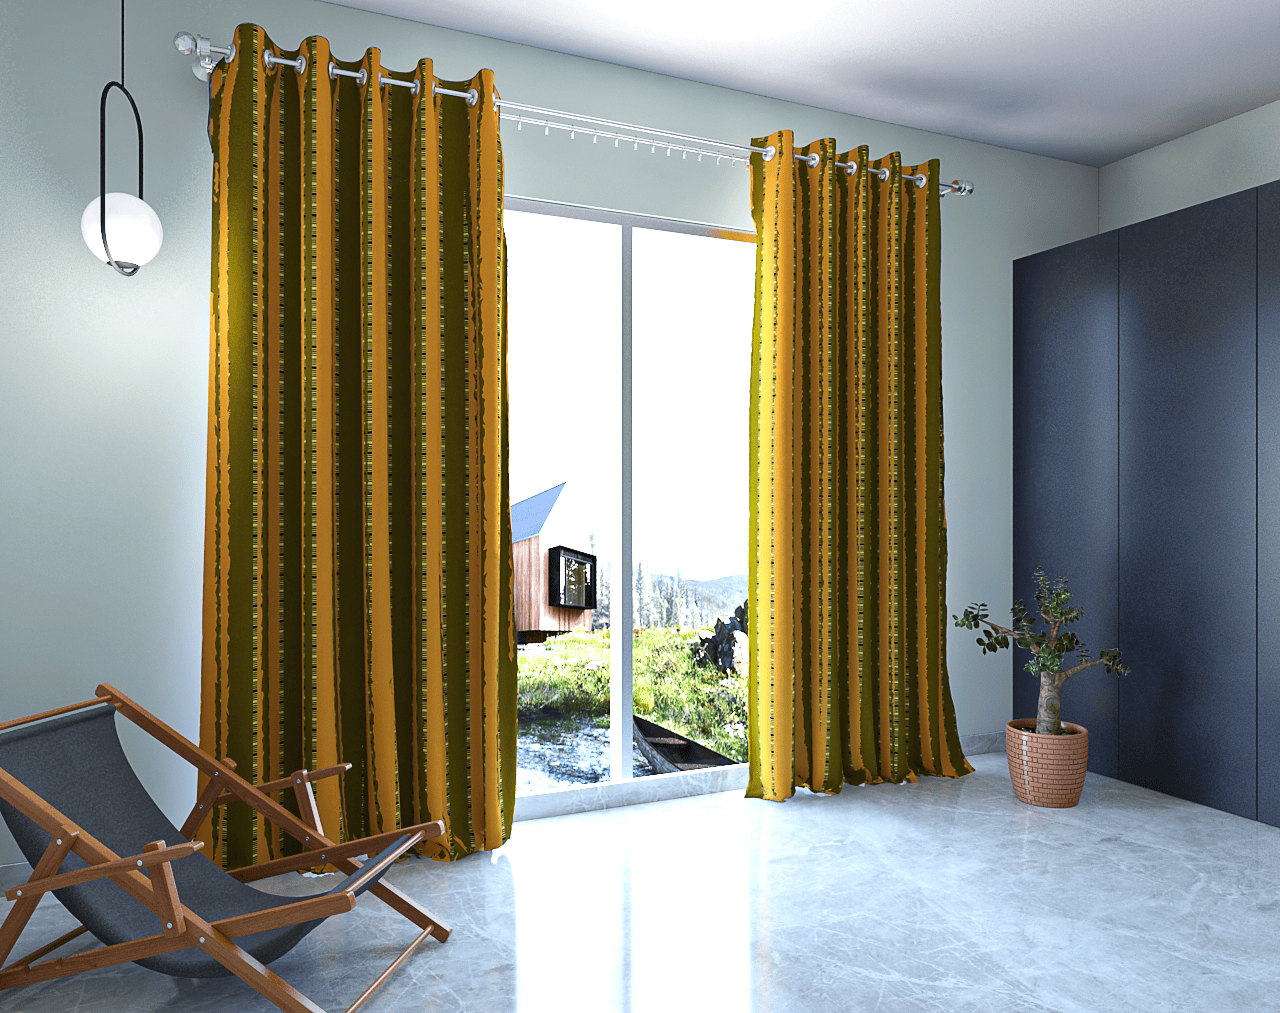 Boria Bistar | Handloom Cotton Curtains for Door with button and loop|3